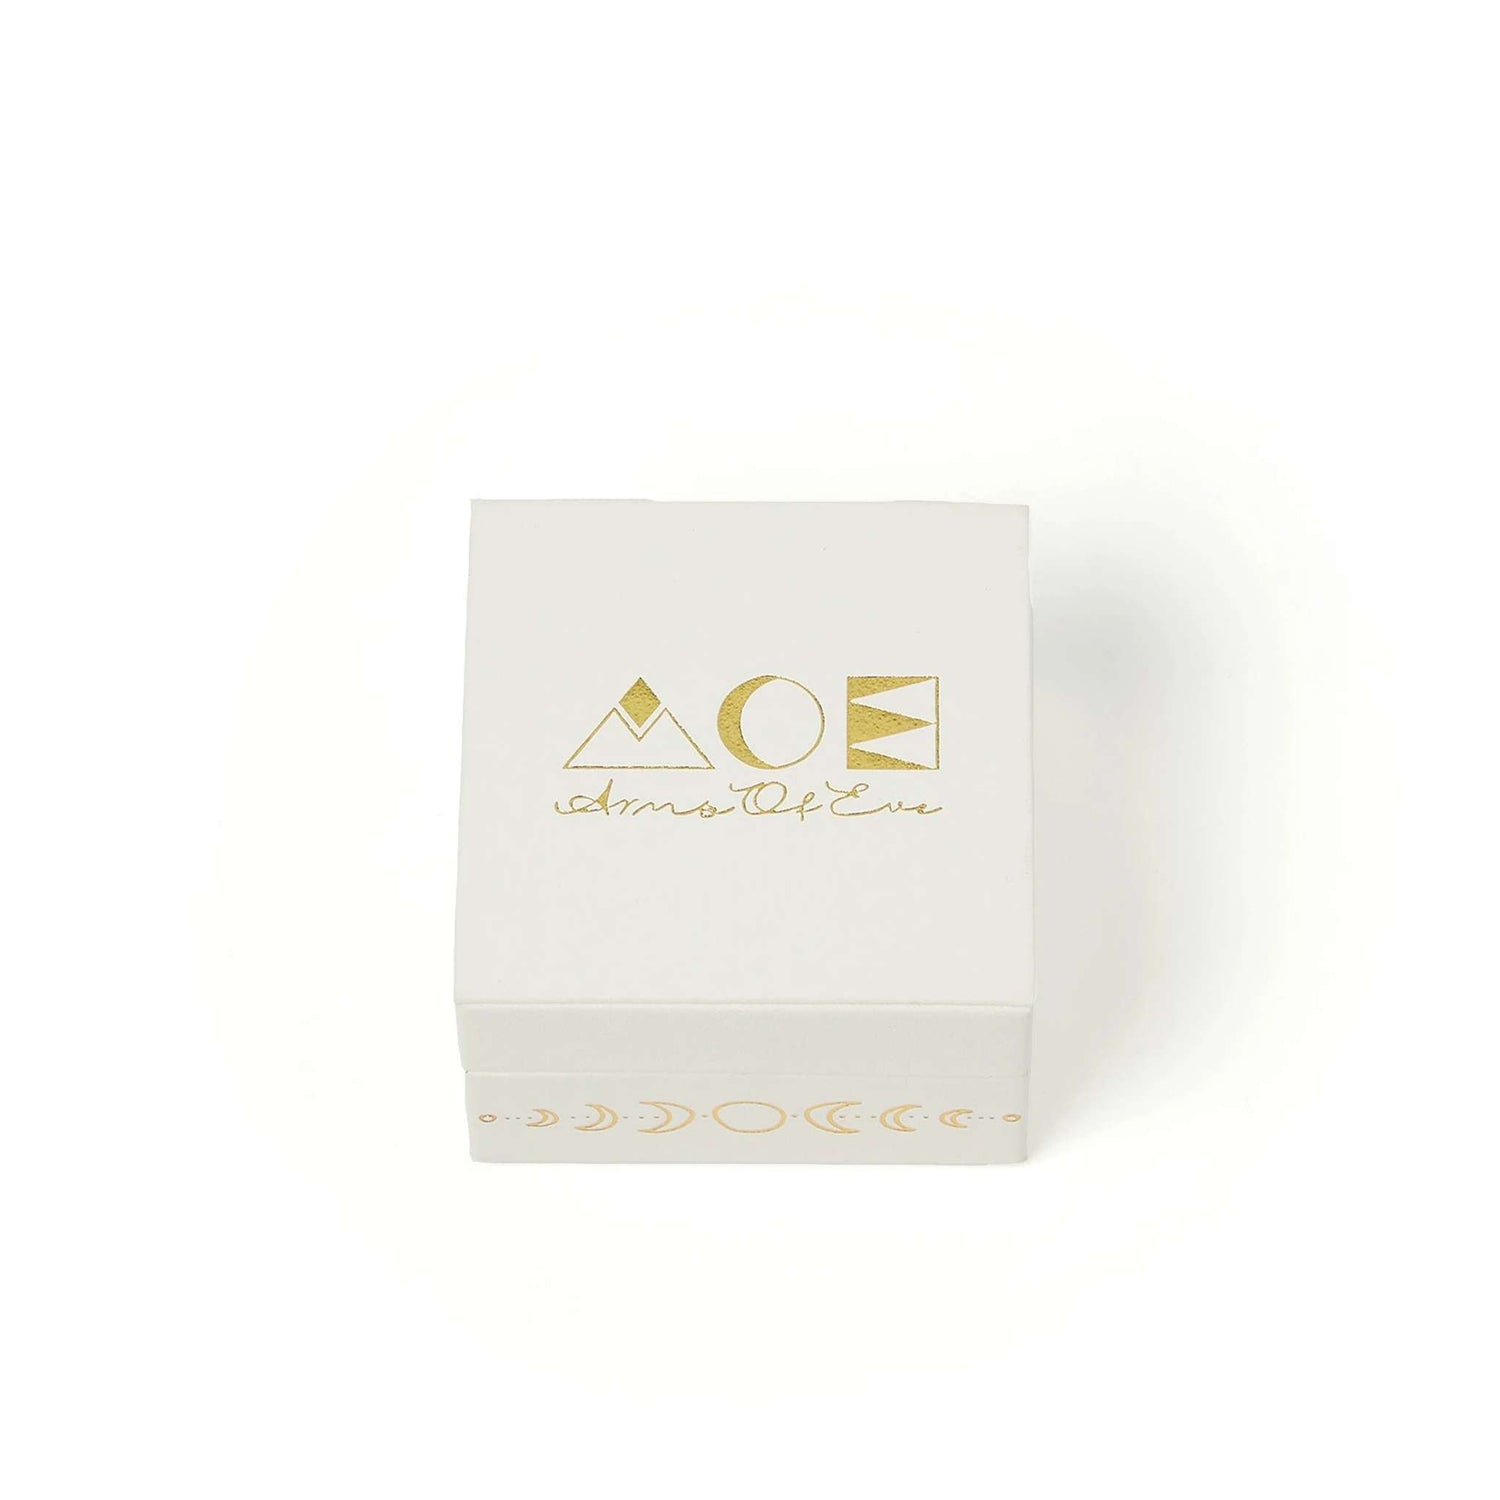 white jewellery box with gold foil logo for arms of eve